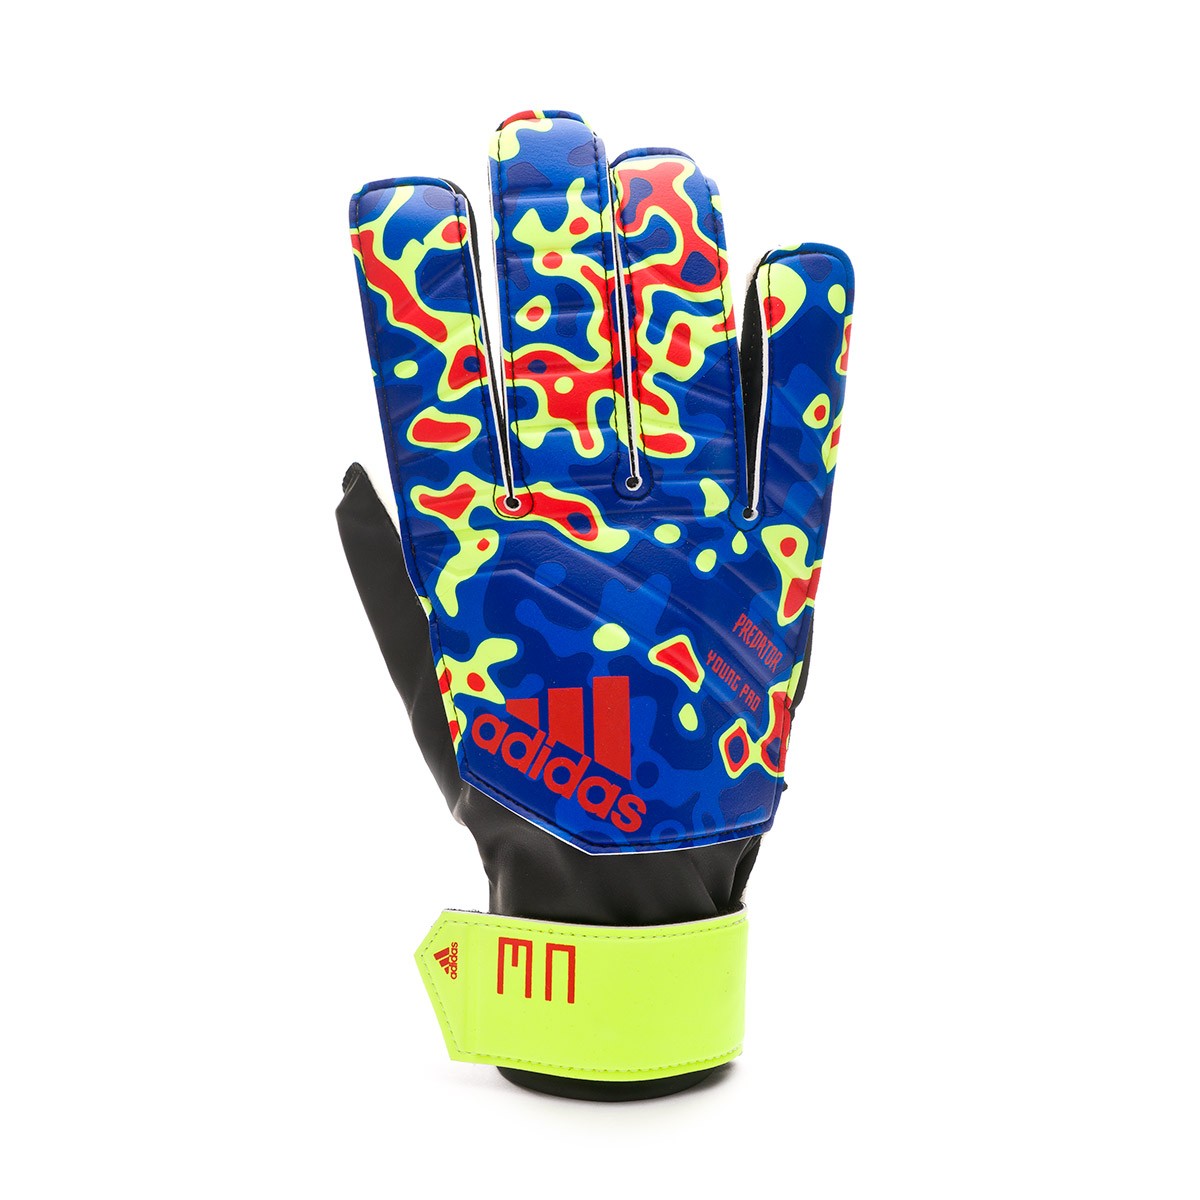 blue and yellow football gloves